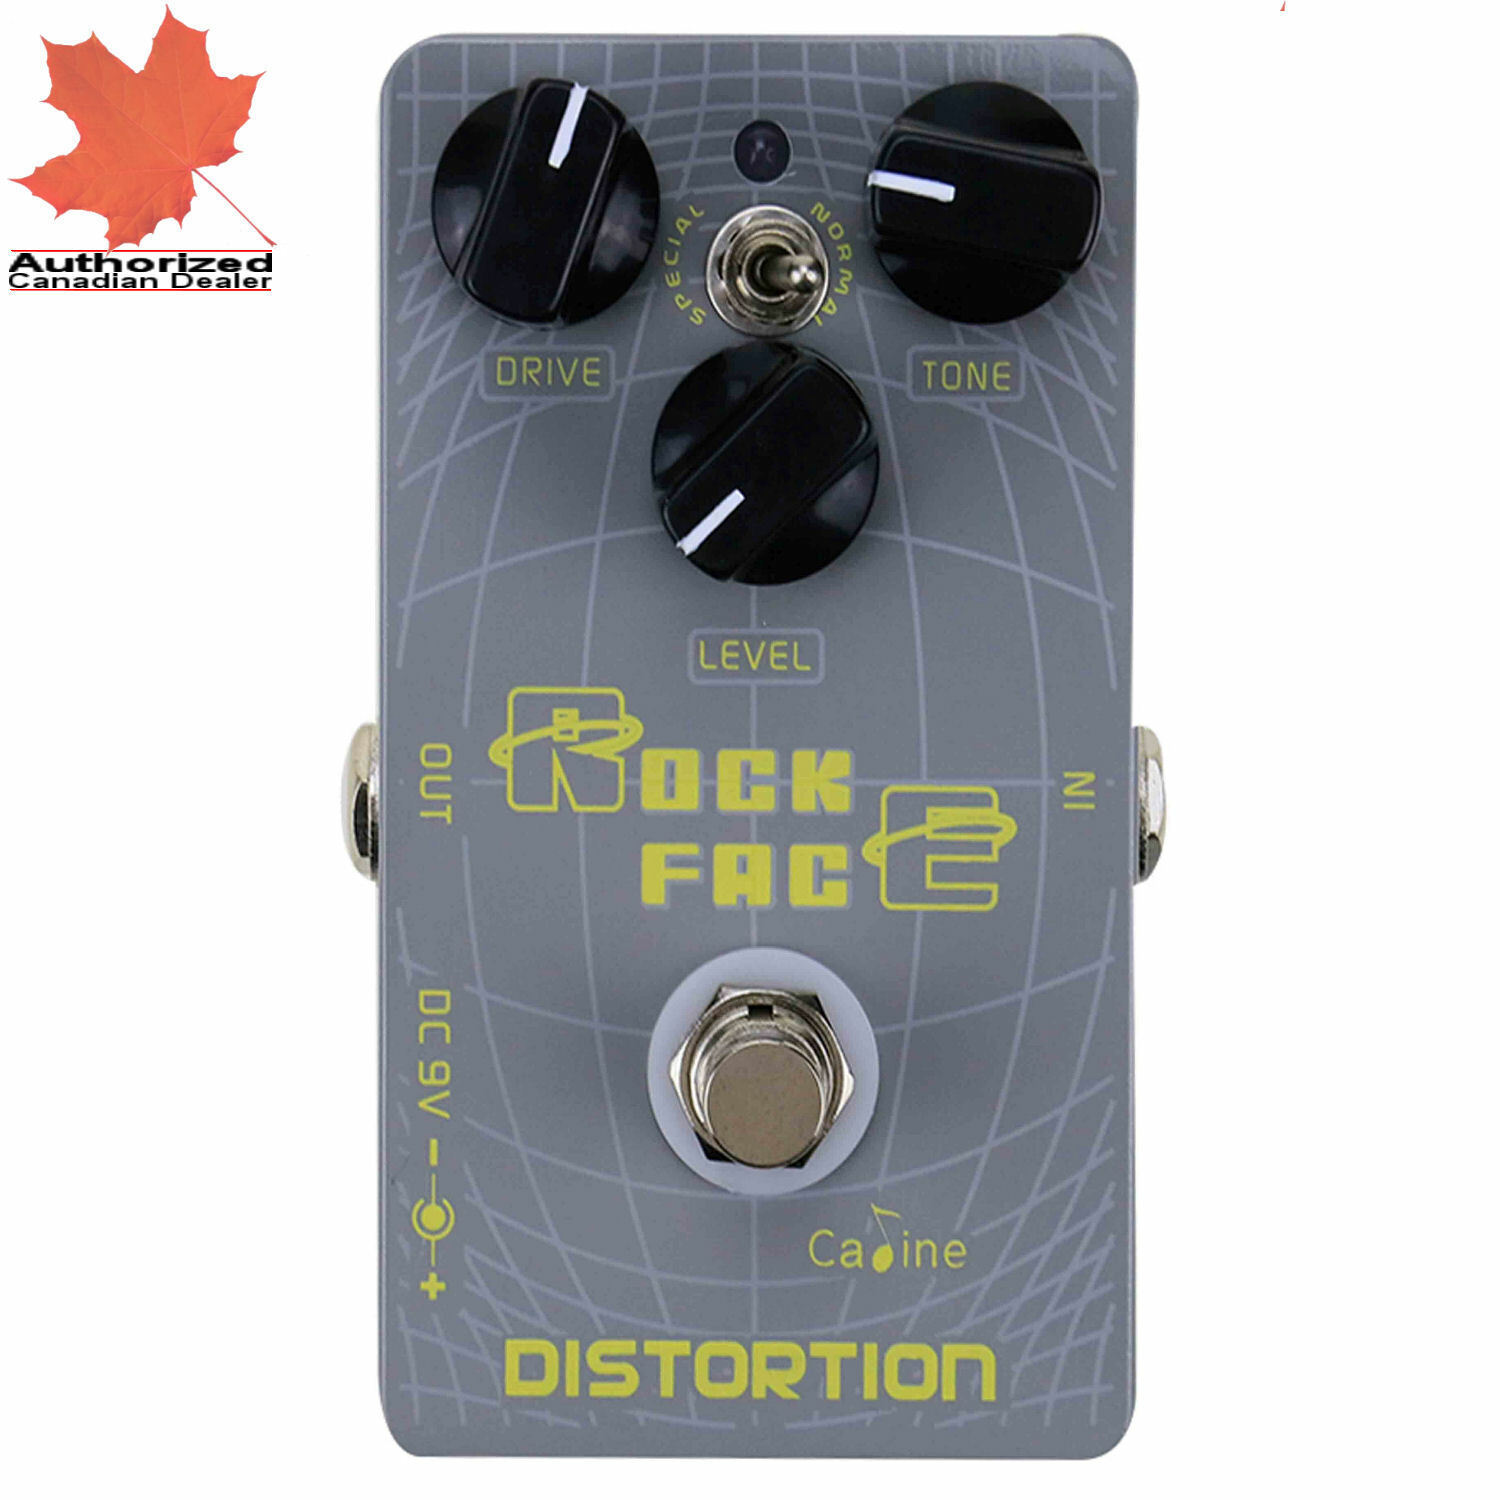 Primary image for Caline CP-21 Rock Face DISTORTION Electric Guitar Effect Pedal New